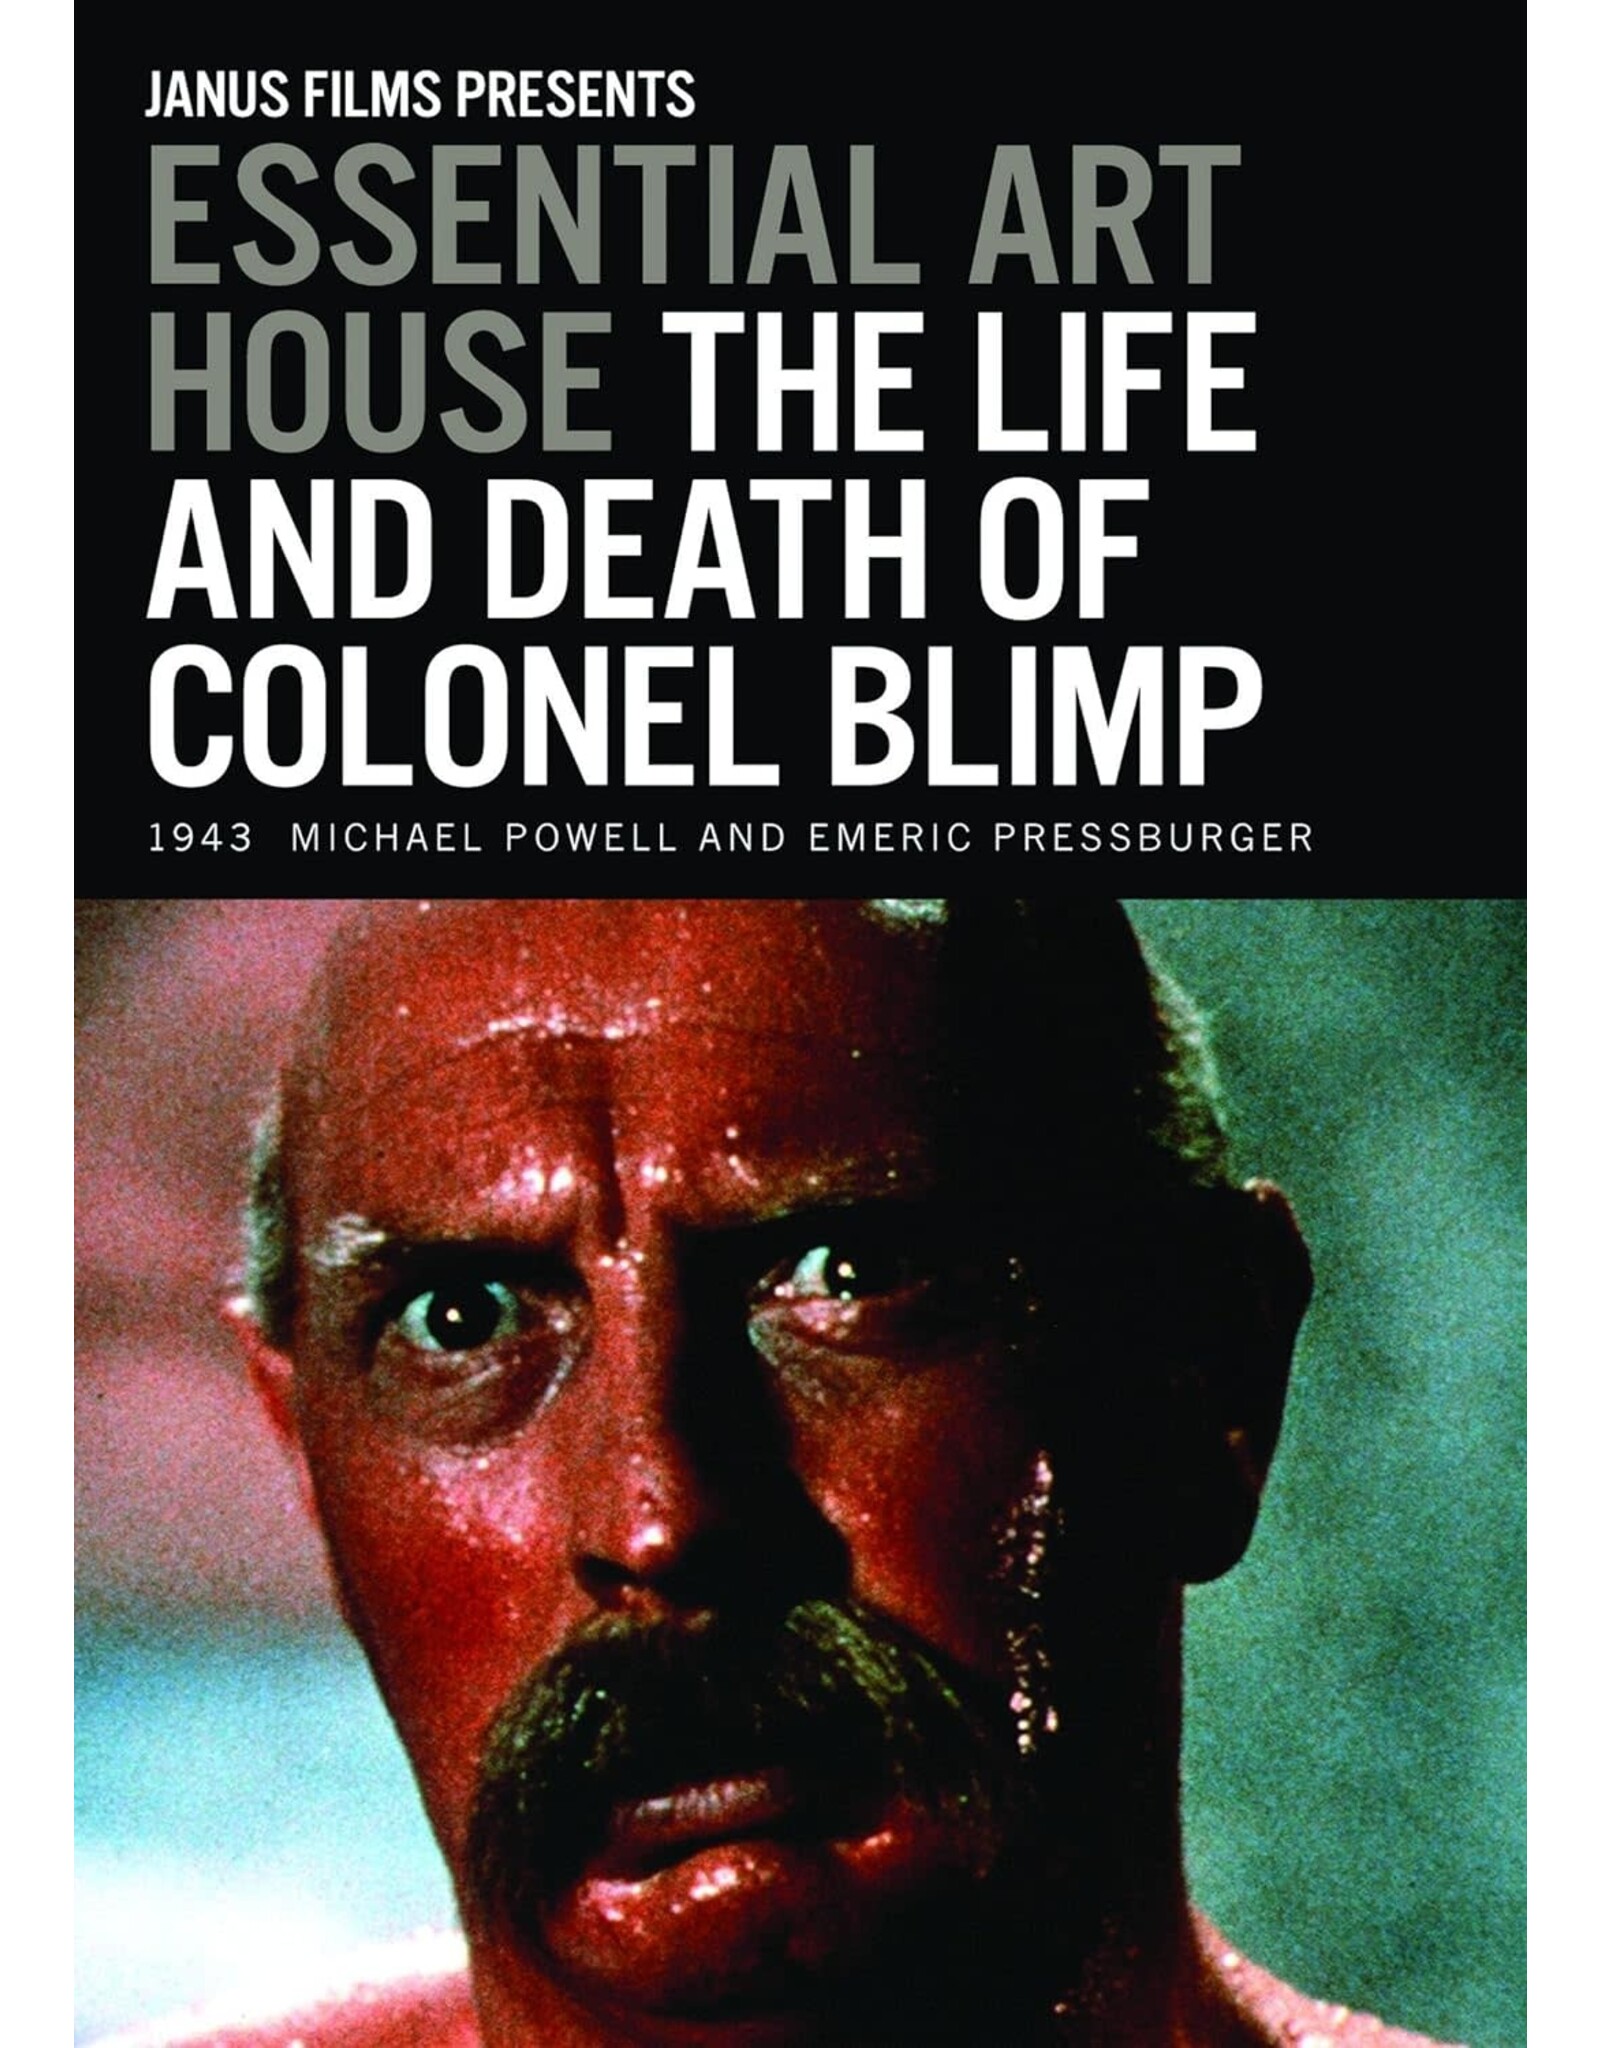 Criterion Collection Life and Death of Colonel Blimp, The (Used)